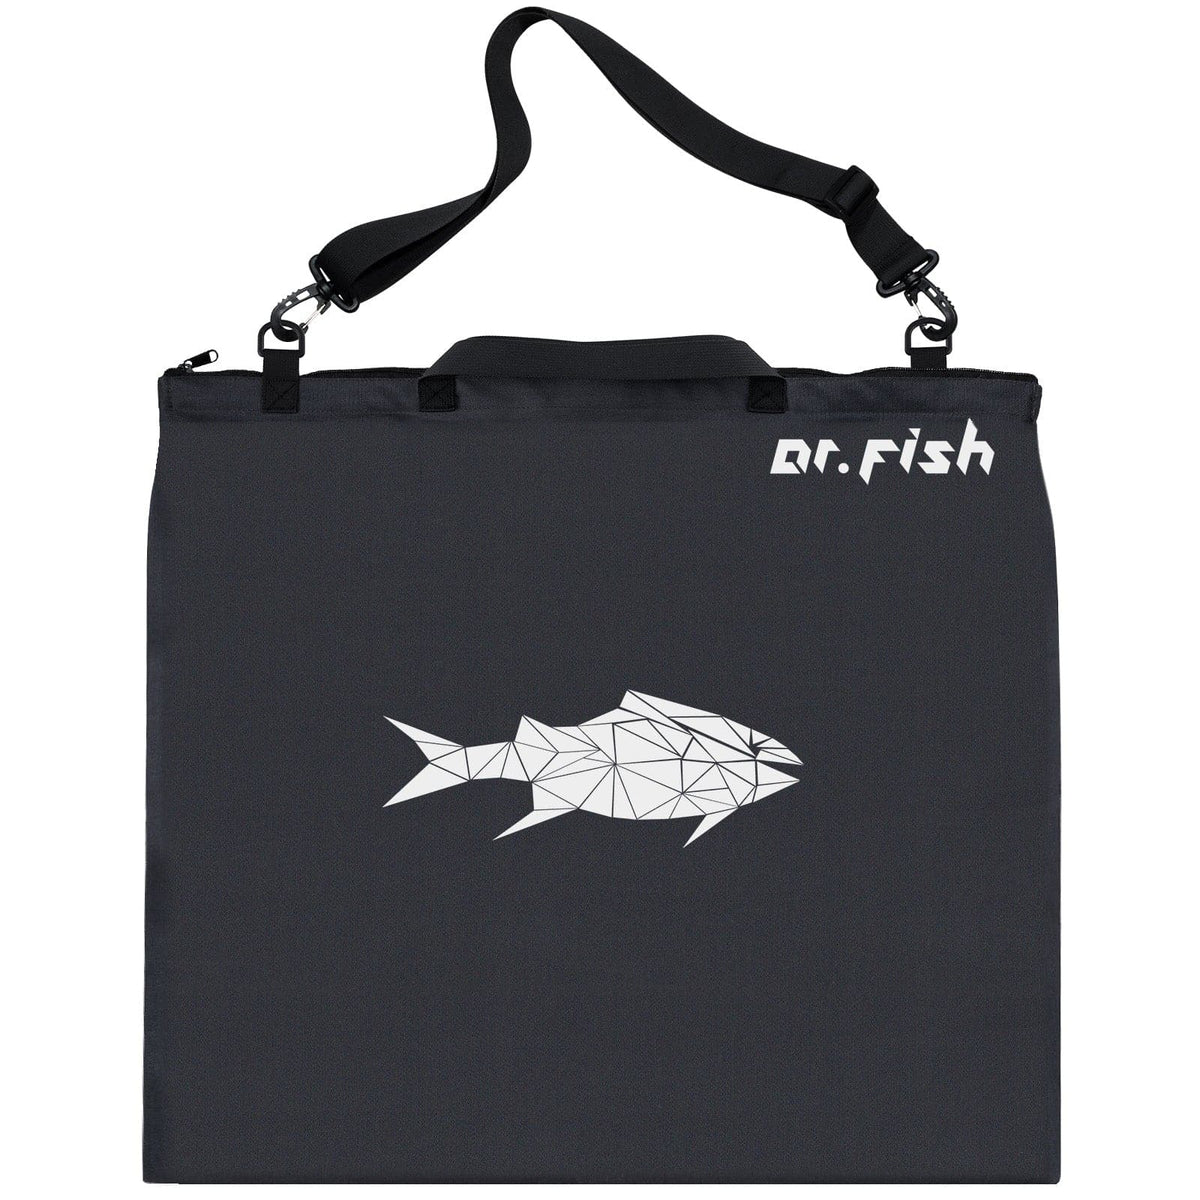 https://cdn.shopify.com/s/files/1/0553/7054/7242/products/Fishing_Weigh_in_Bag_Tournament_Dr.Fish_1.jpg?v=1701956791&width=1200